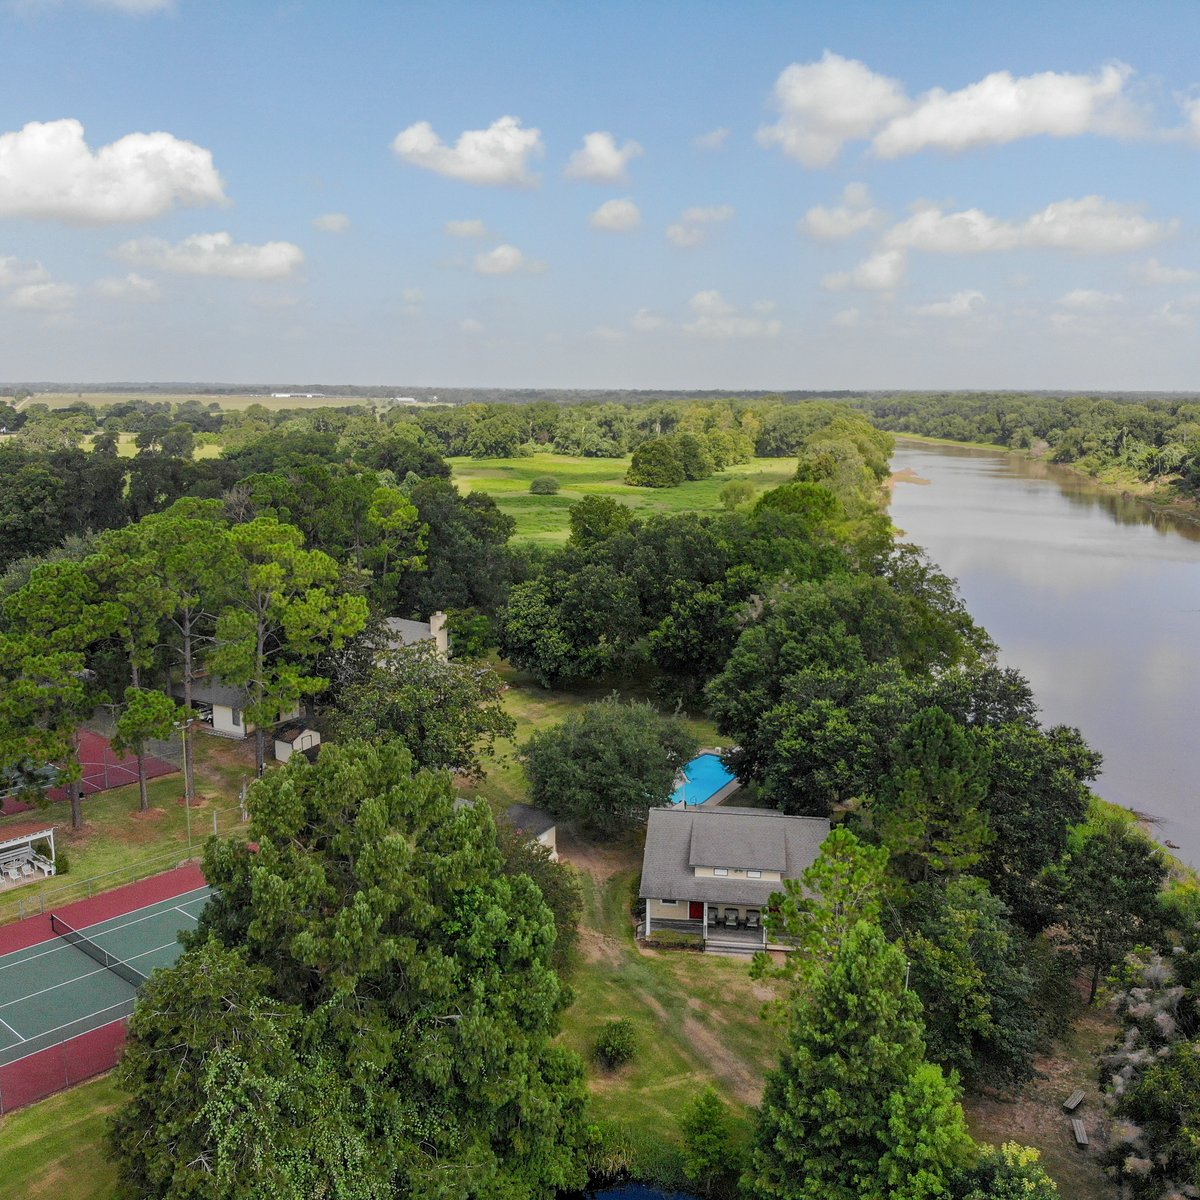 Late Dr. Denton Cooley's Houston-area ranch for sale - Houston